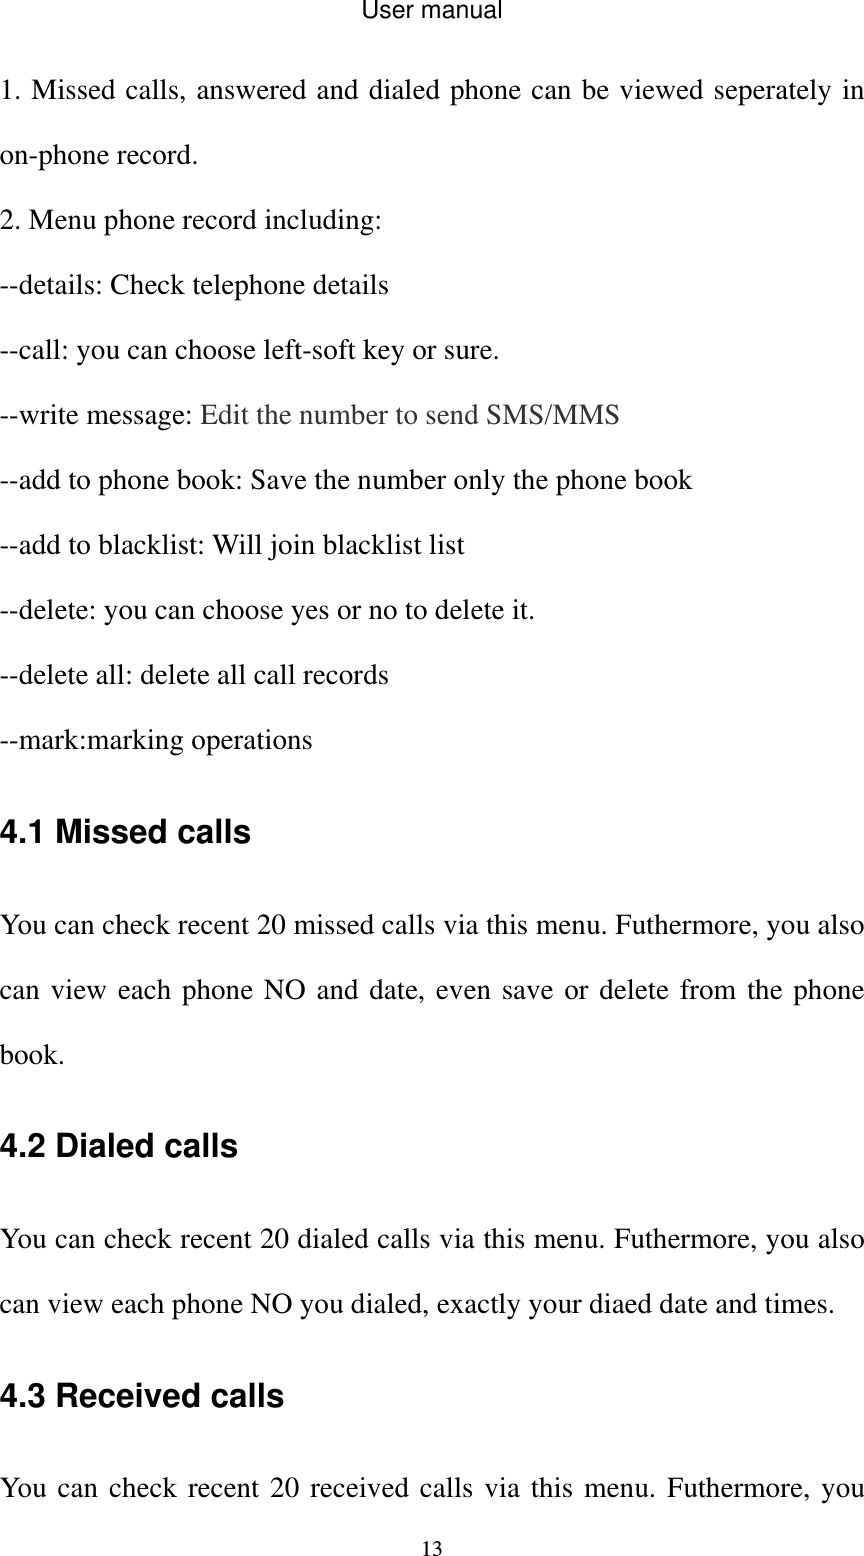 User manual  131. Missed calls, answered and dialed phone can be viewed seperately in on-phone record. 2. Menu phone record including: --details: Check telephone details --call: you can choose left-soft key or sure. --write message: Edit the number to send SMS/MMS --add to phone book: Save the number only the phone book --add to blacklist: Will join blacklist list --delete: you can choose yes or no to delete it. --delete all: delete all call records --mark:marking operations 4.1 Missed calls You can check recent 20 missed calls via this menu. Futhermore, you also can view each phone NO and date, even save or delete from the phone book. 4.2 Dialed calls You can check recent 20 dialed calls via this menu. Futhermore, you also can view each phone NO you dialed, exactly your diaed date and times. 4.3 Received calls You can check recent 20 received calls via this menu. Futhermore, you 